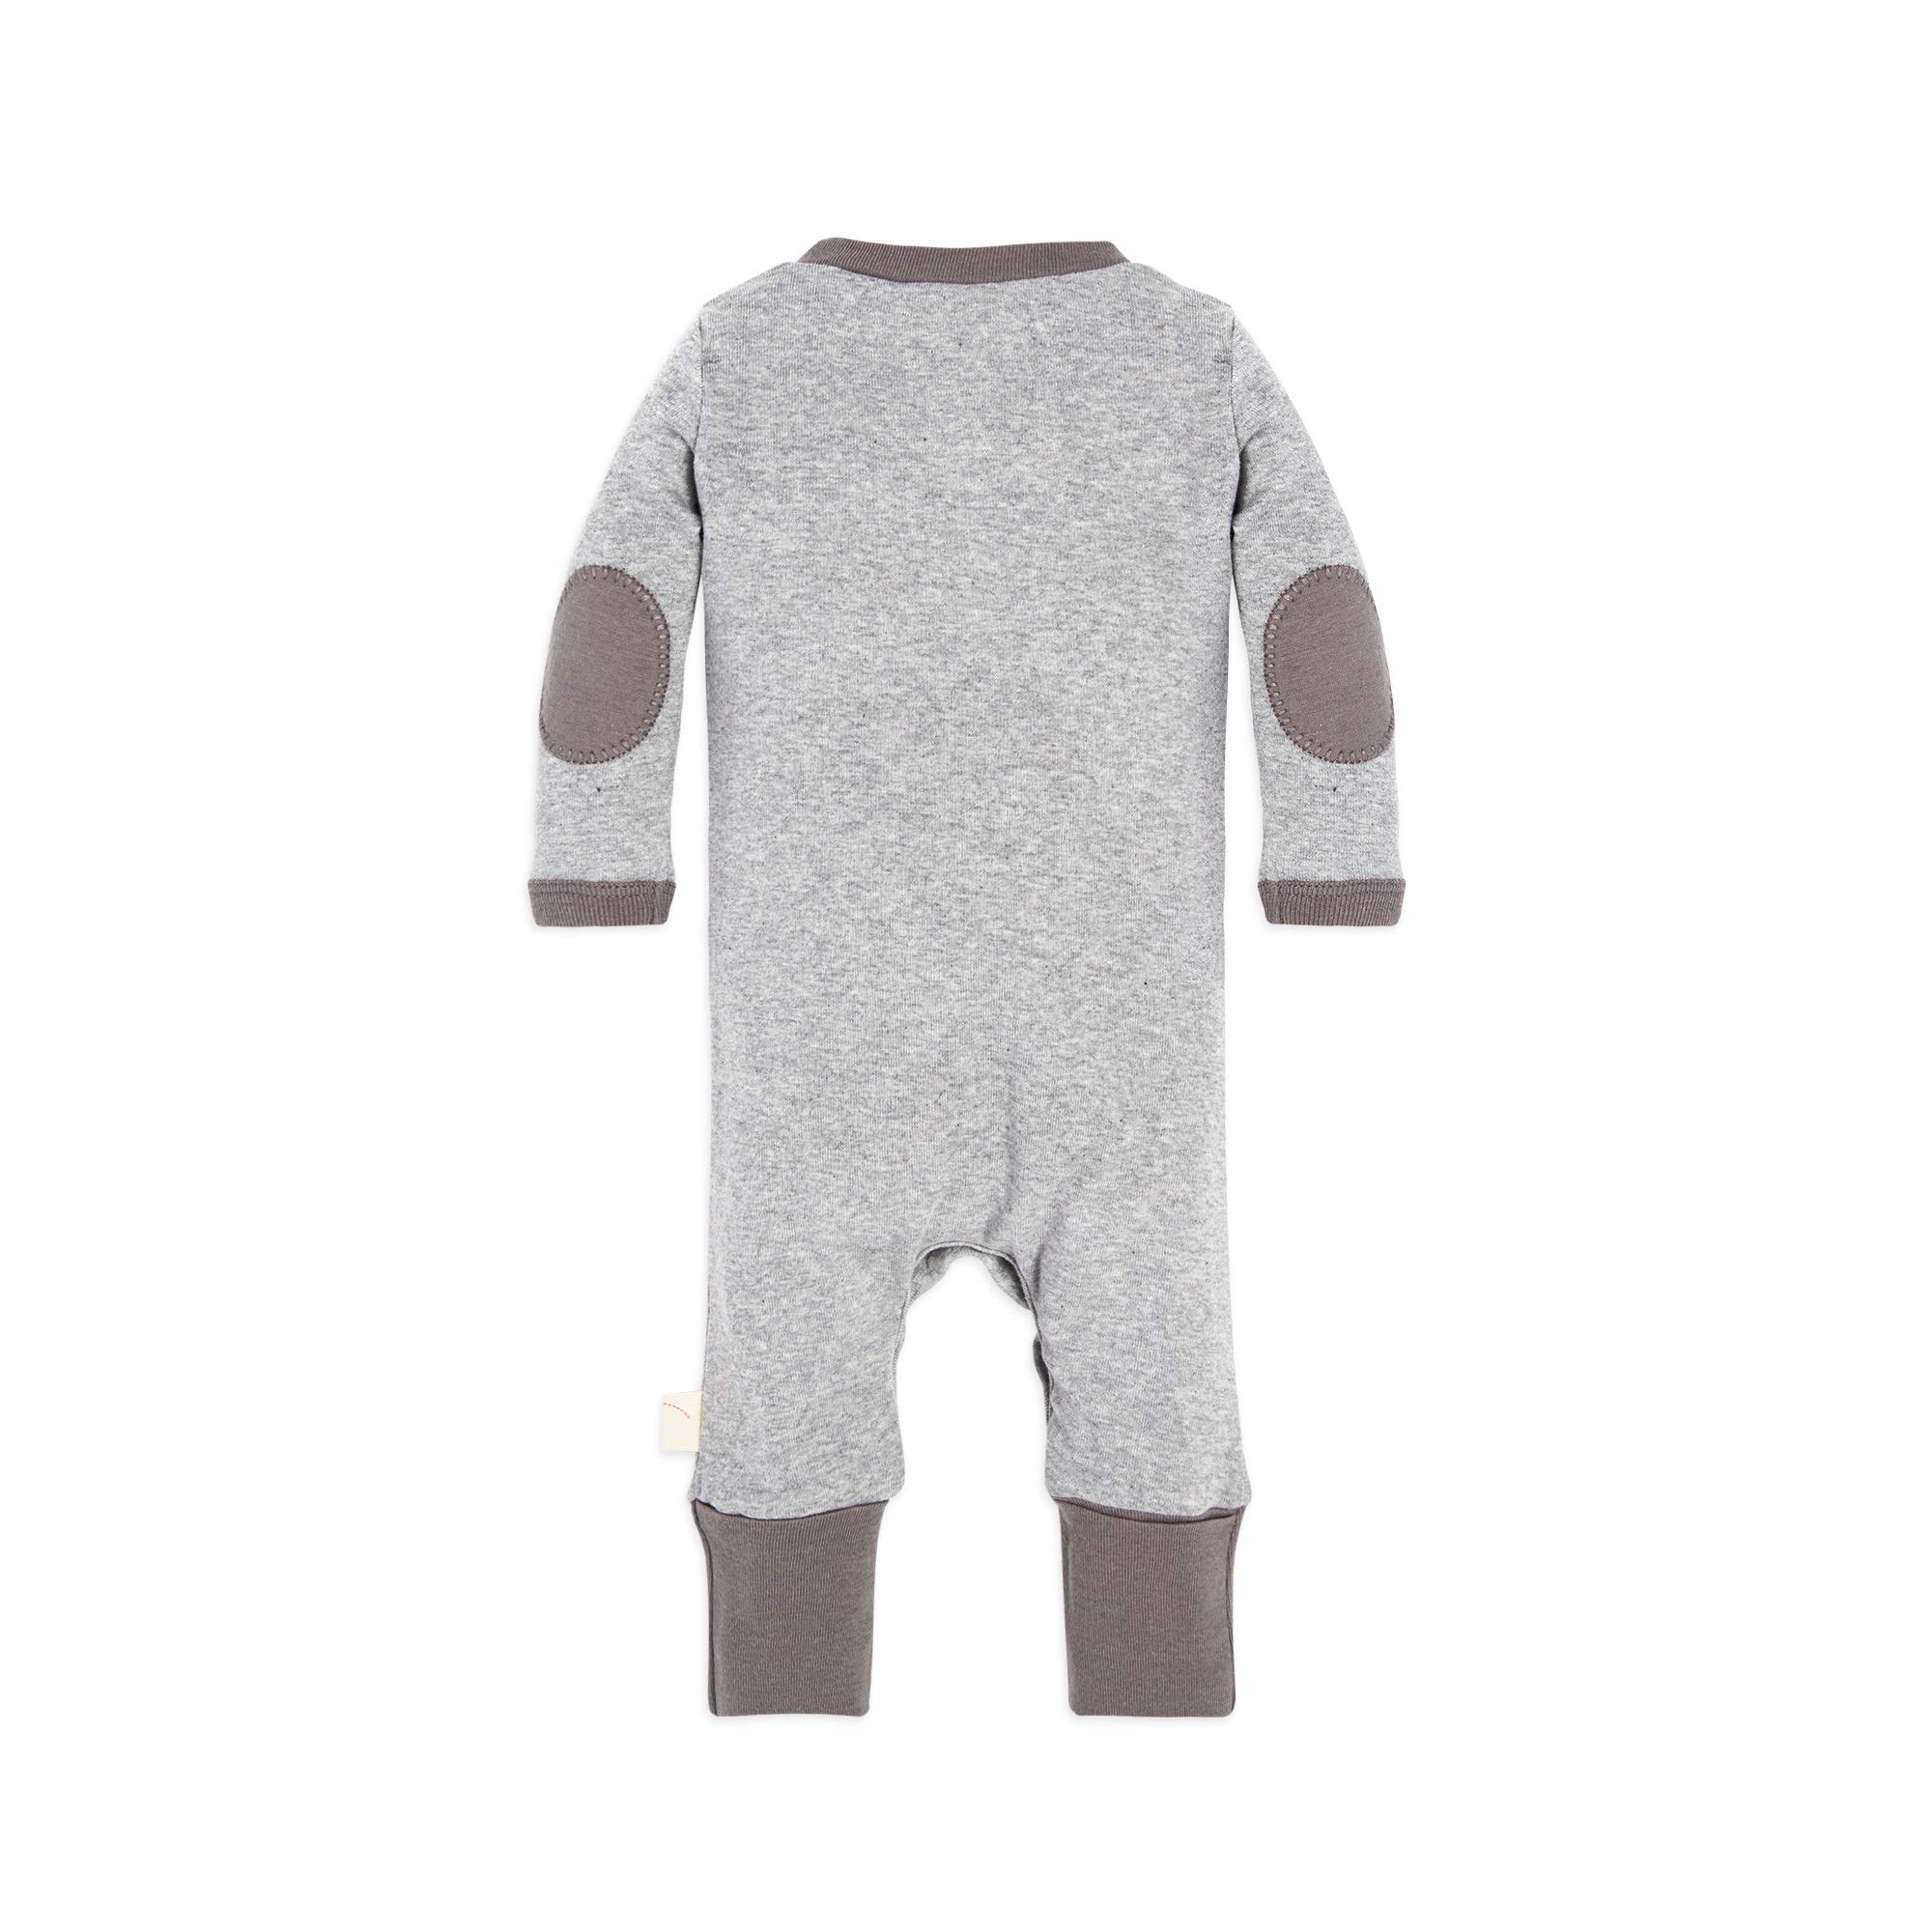 Burt's Bees Baby baby-boys Romper Jumpsuit, 100% Organic Cotton One-piece Short Sleeve Shortall, Long Sleeve Coverall